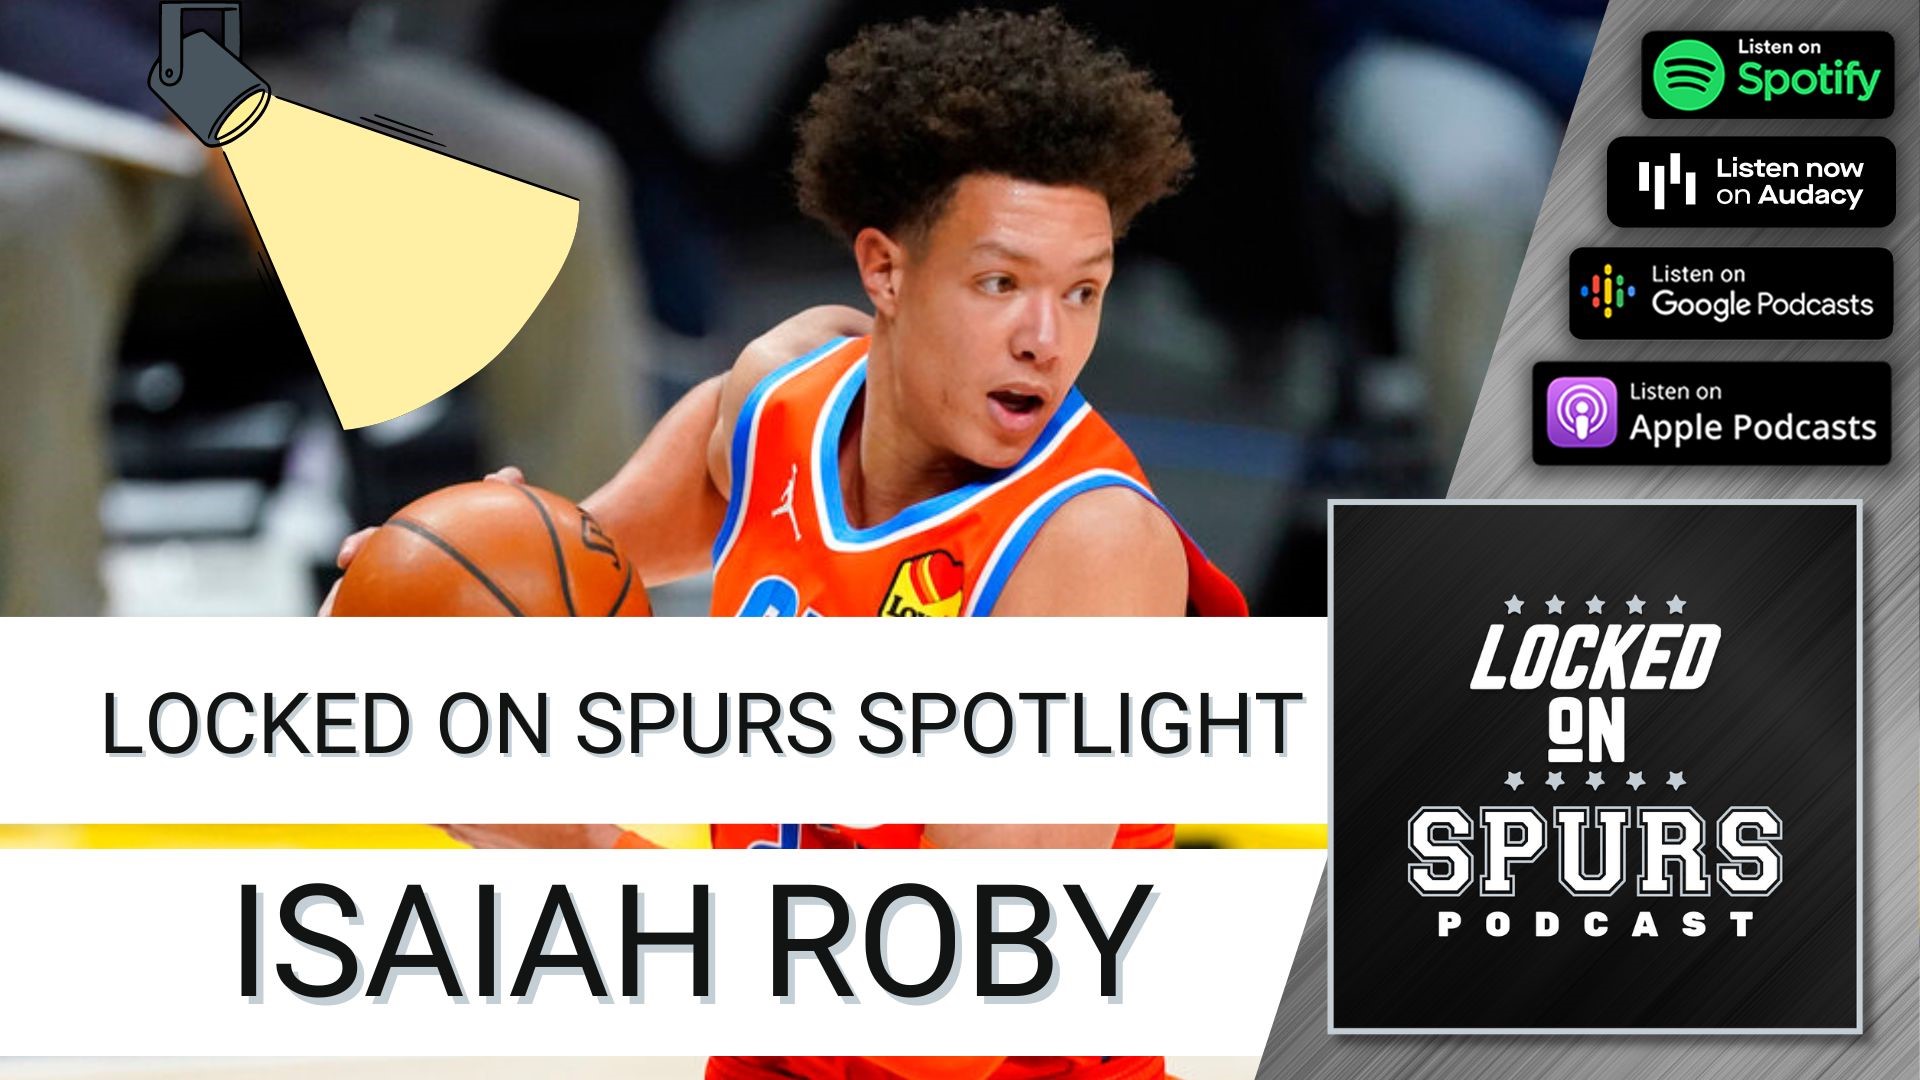 What will the newest member of the Spurs bring to the team next season?